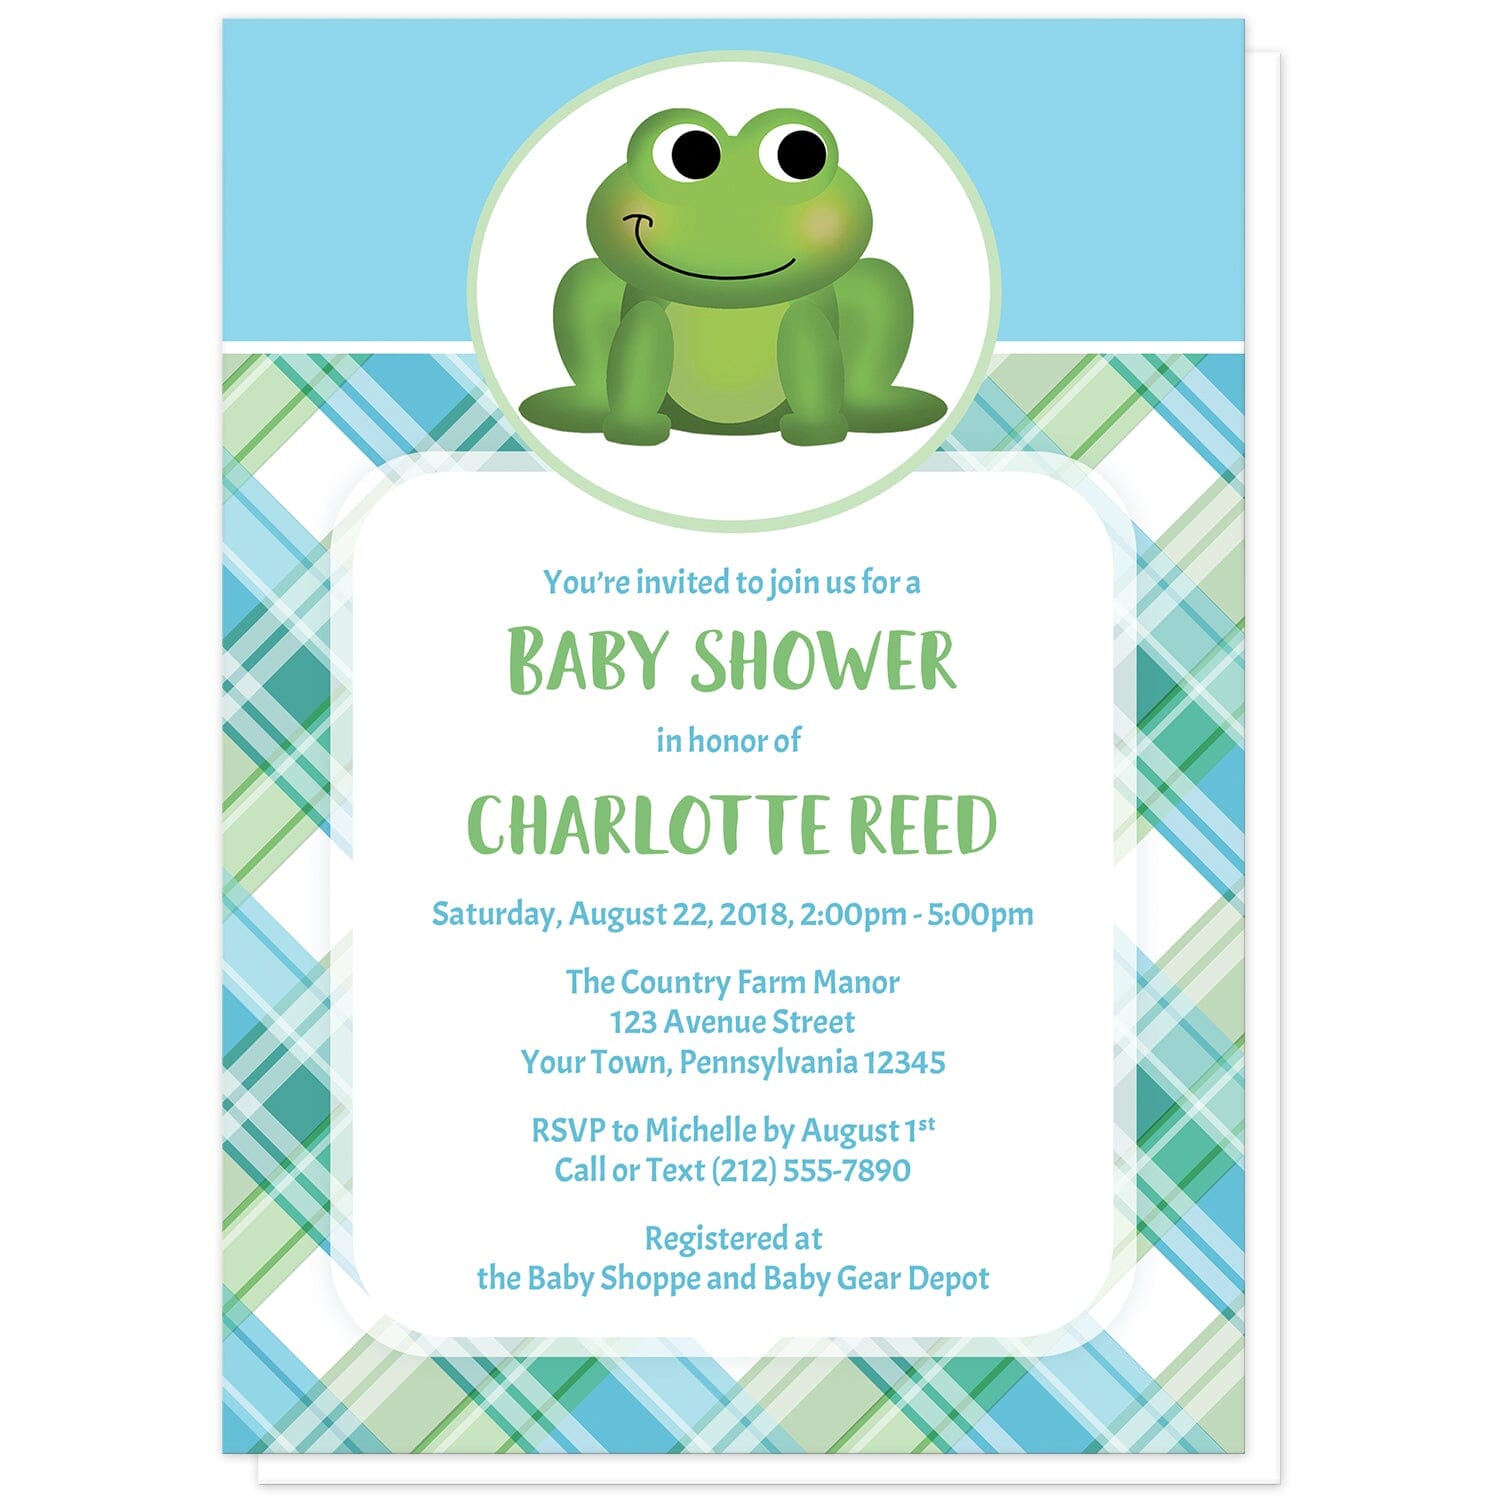 Cute Frog Green and Blue Plaid Baby Shower Invitations